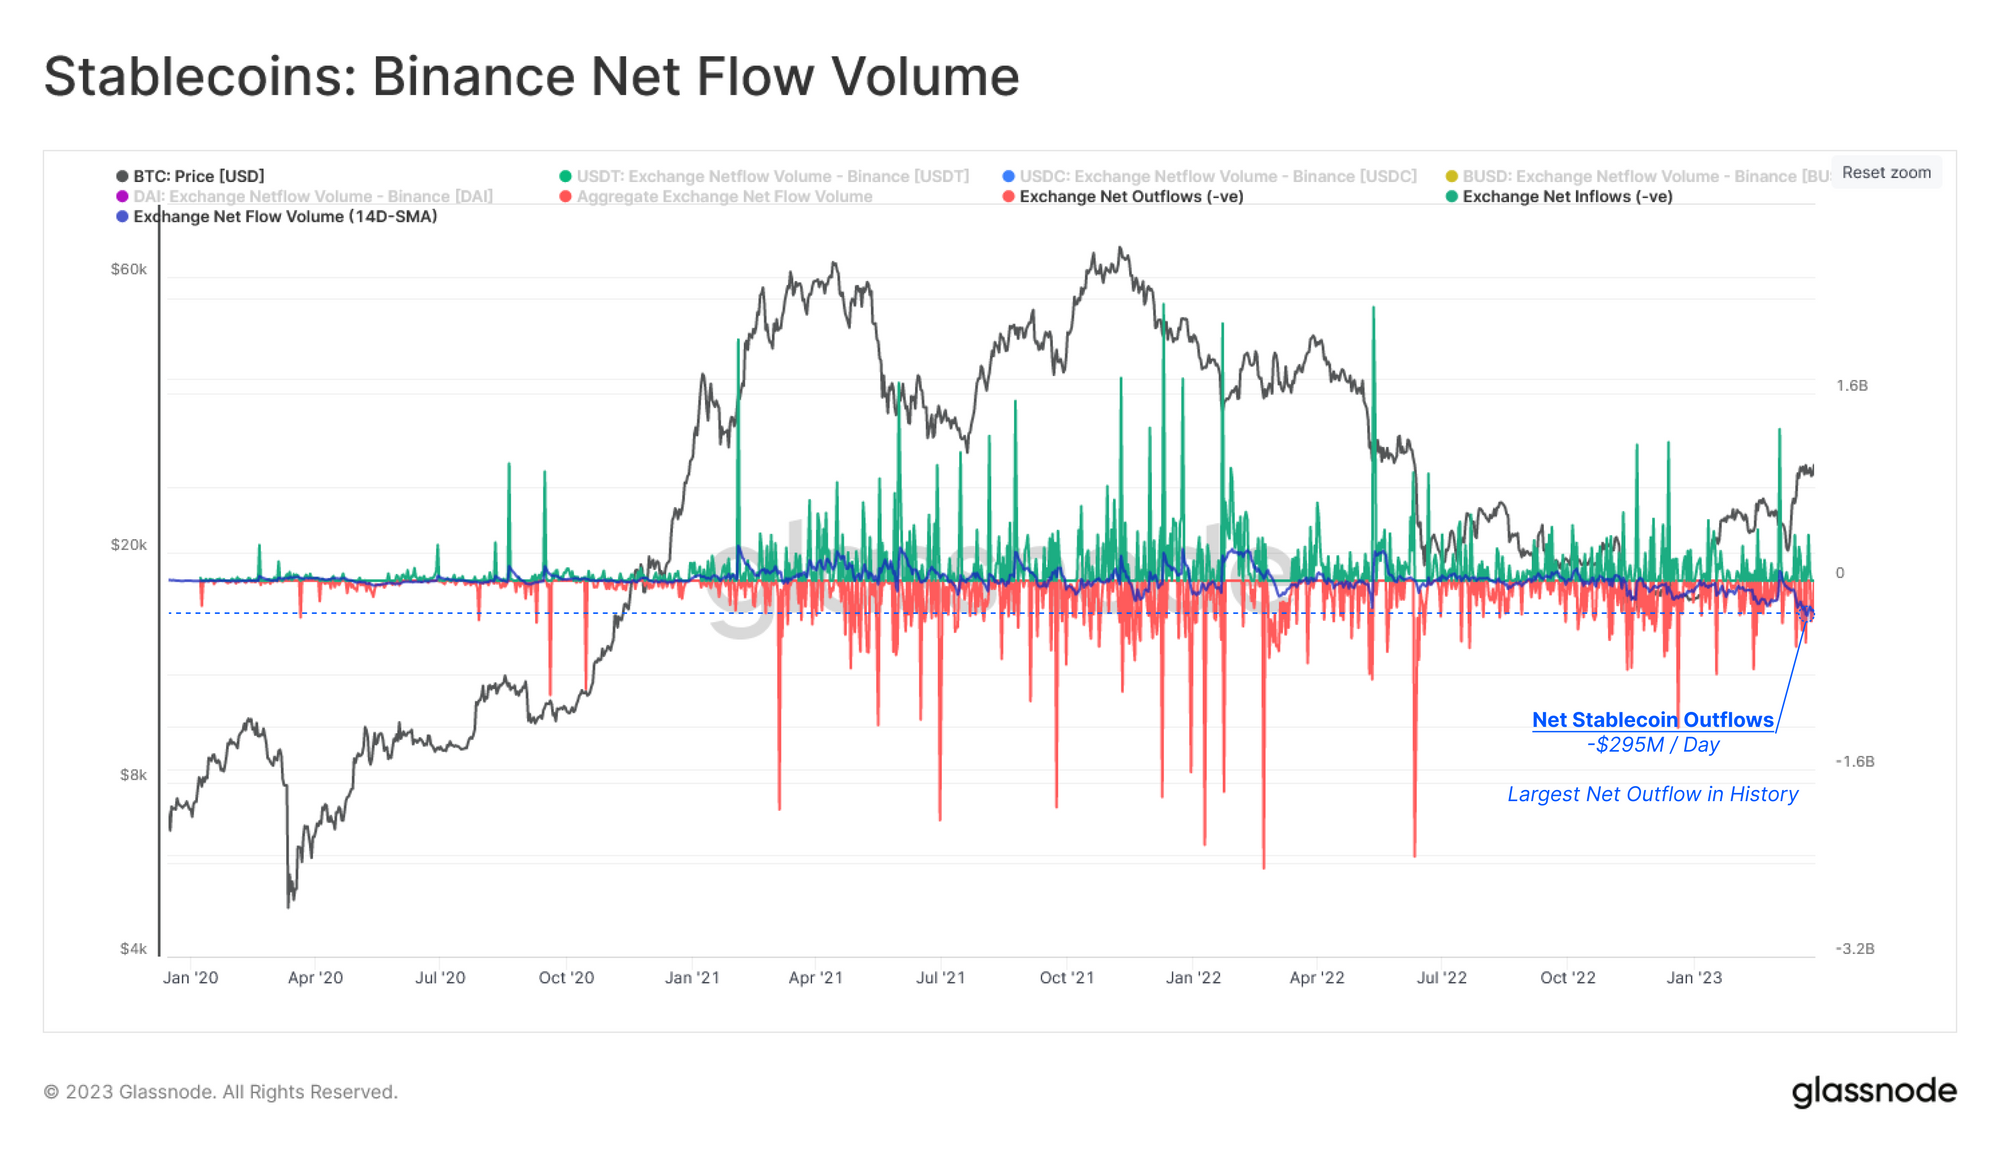 Binance outflow